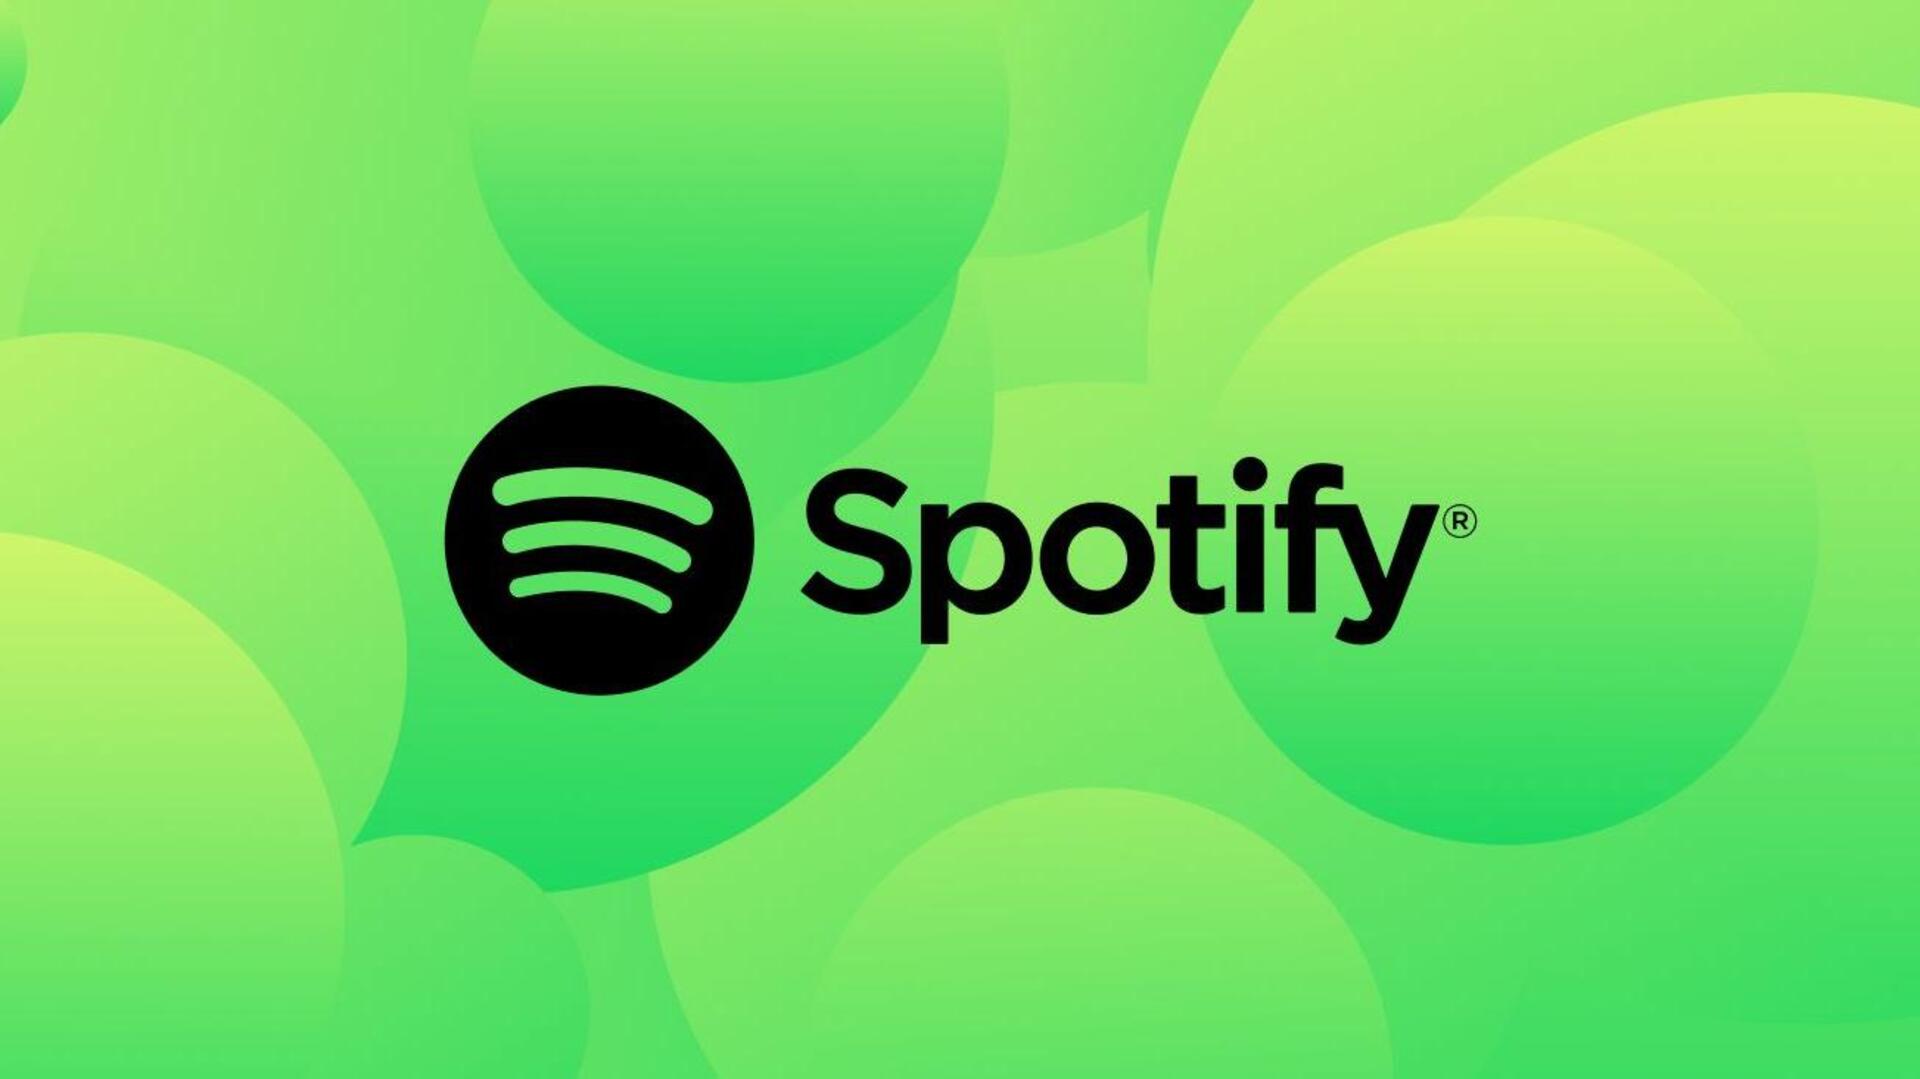 Spotify appoints Christian Luiga as its new CFO